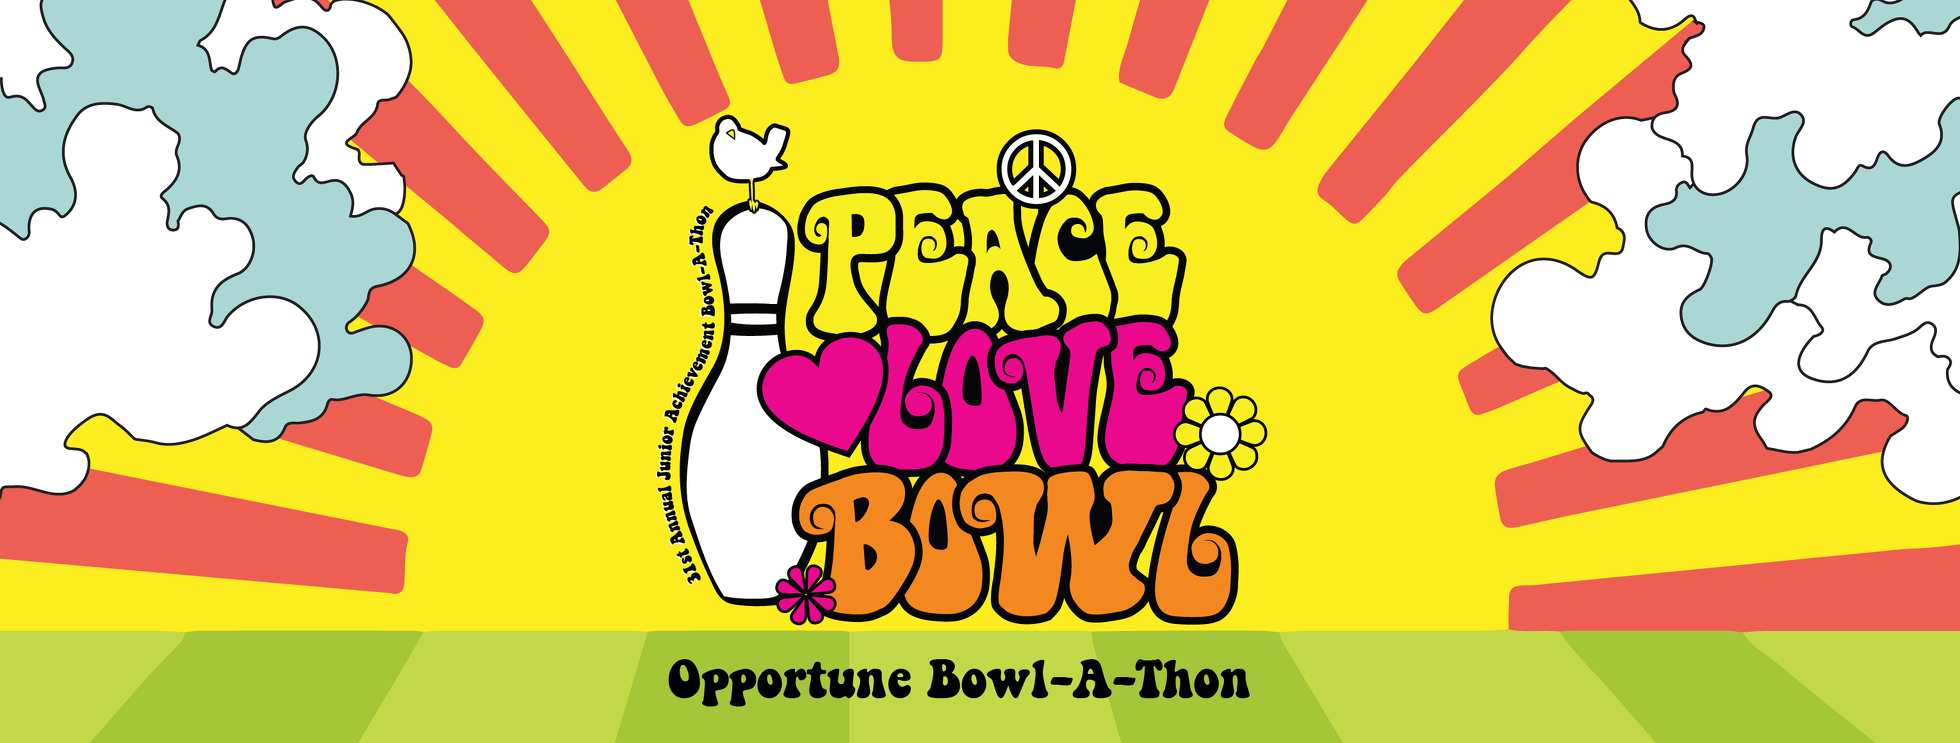 Opportune Bowl-A-Thon